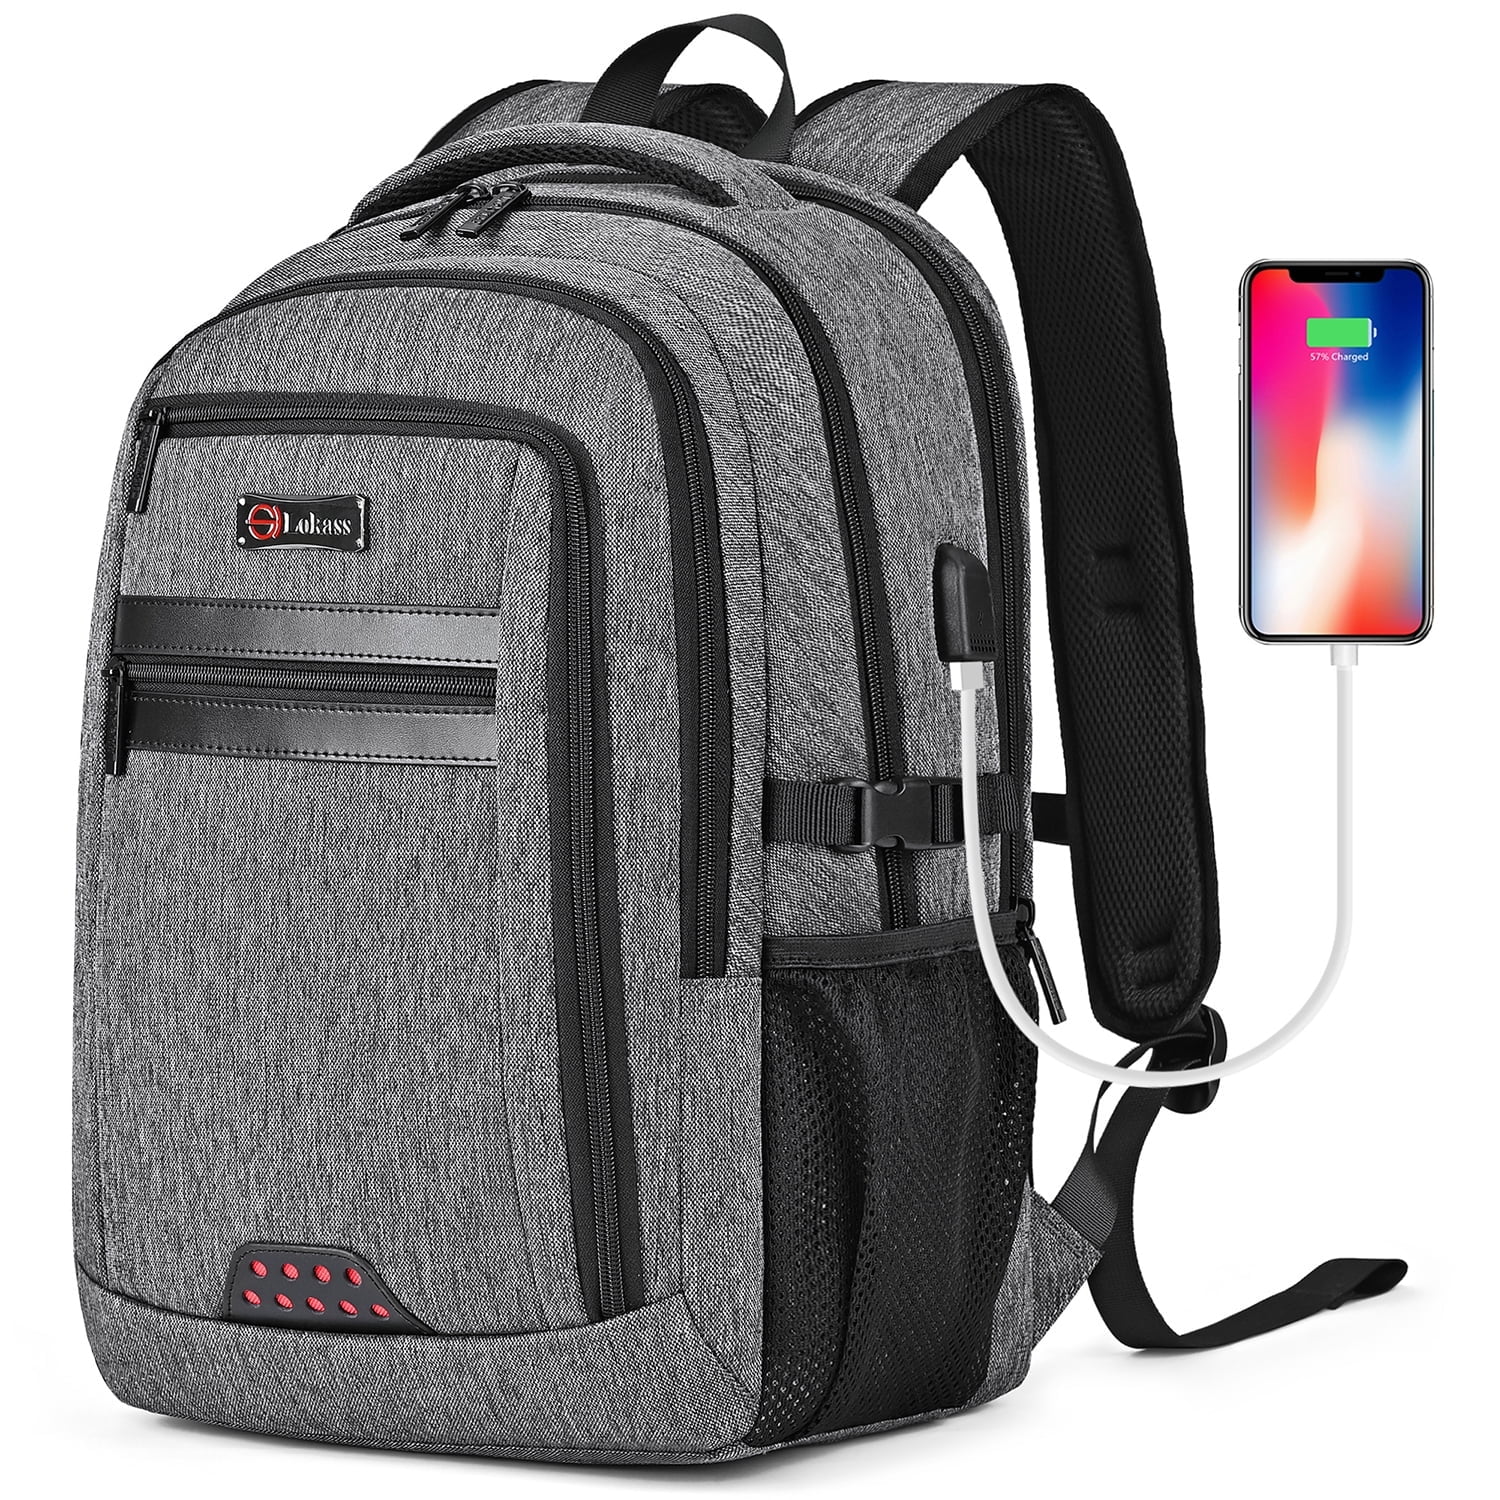 Spencer Laptop Backpack for Men & Women, Anti Theft with lock Water  Resistant Business Backpack with USB Charging Port Fits UNDER 17 Laptop 